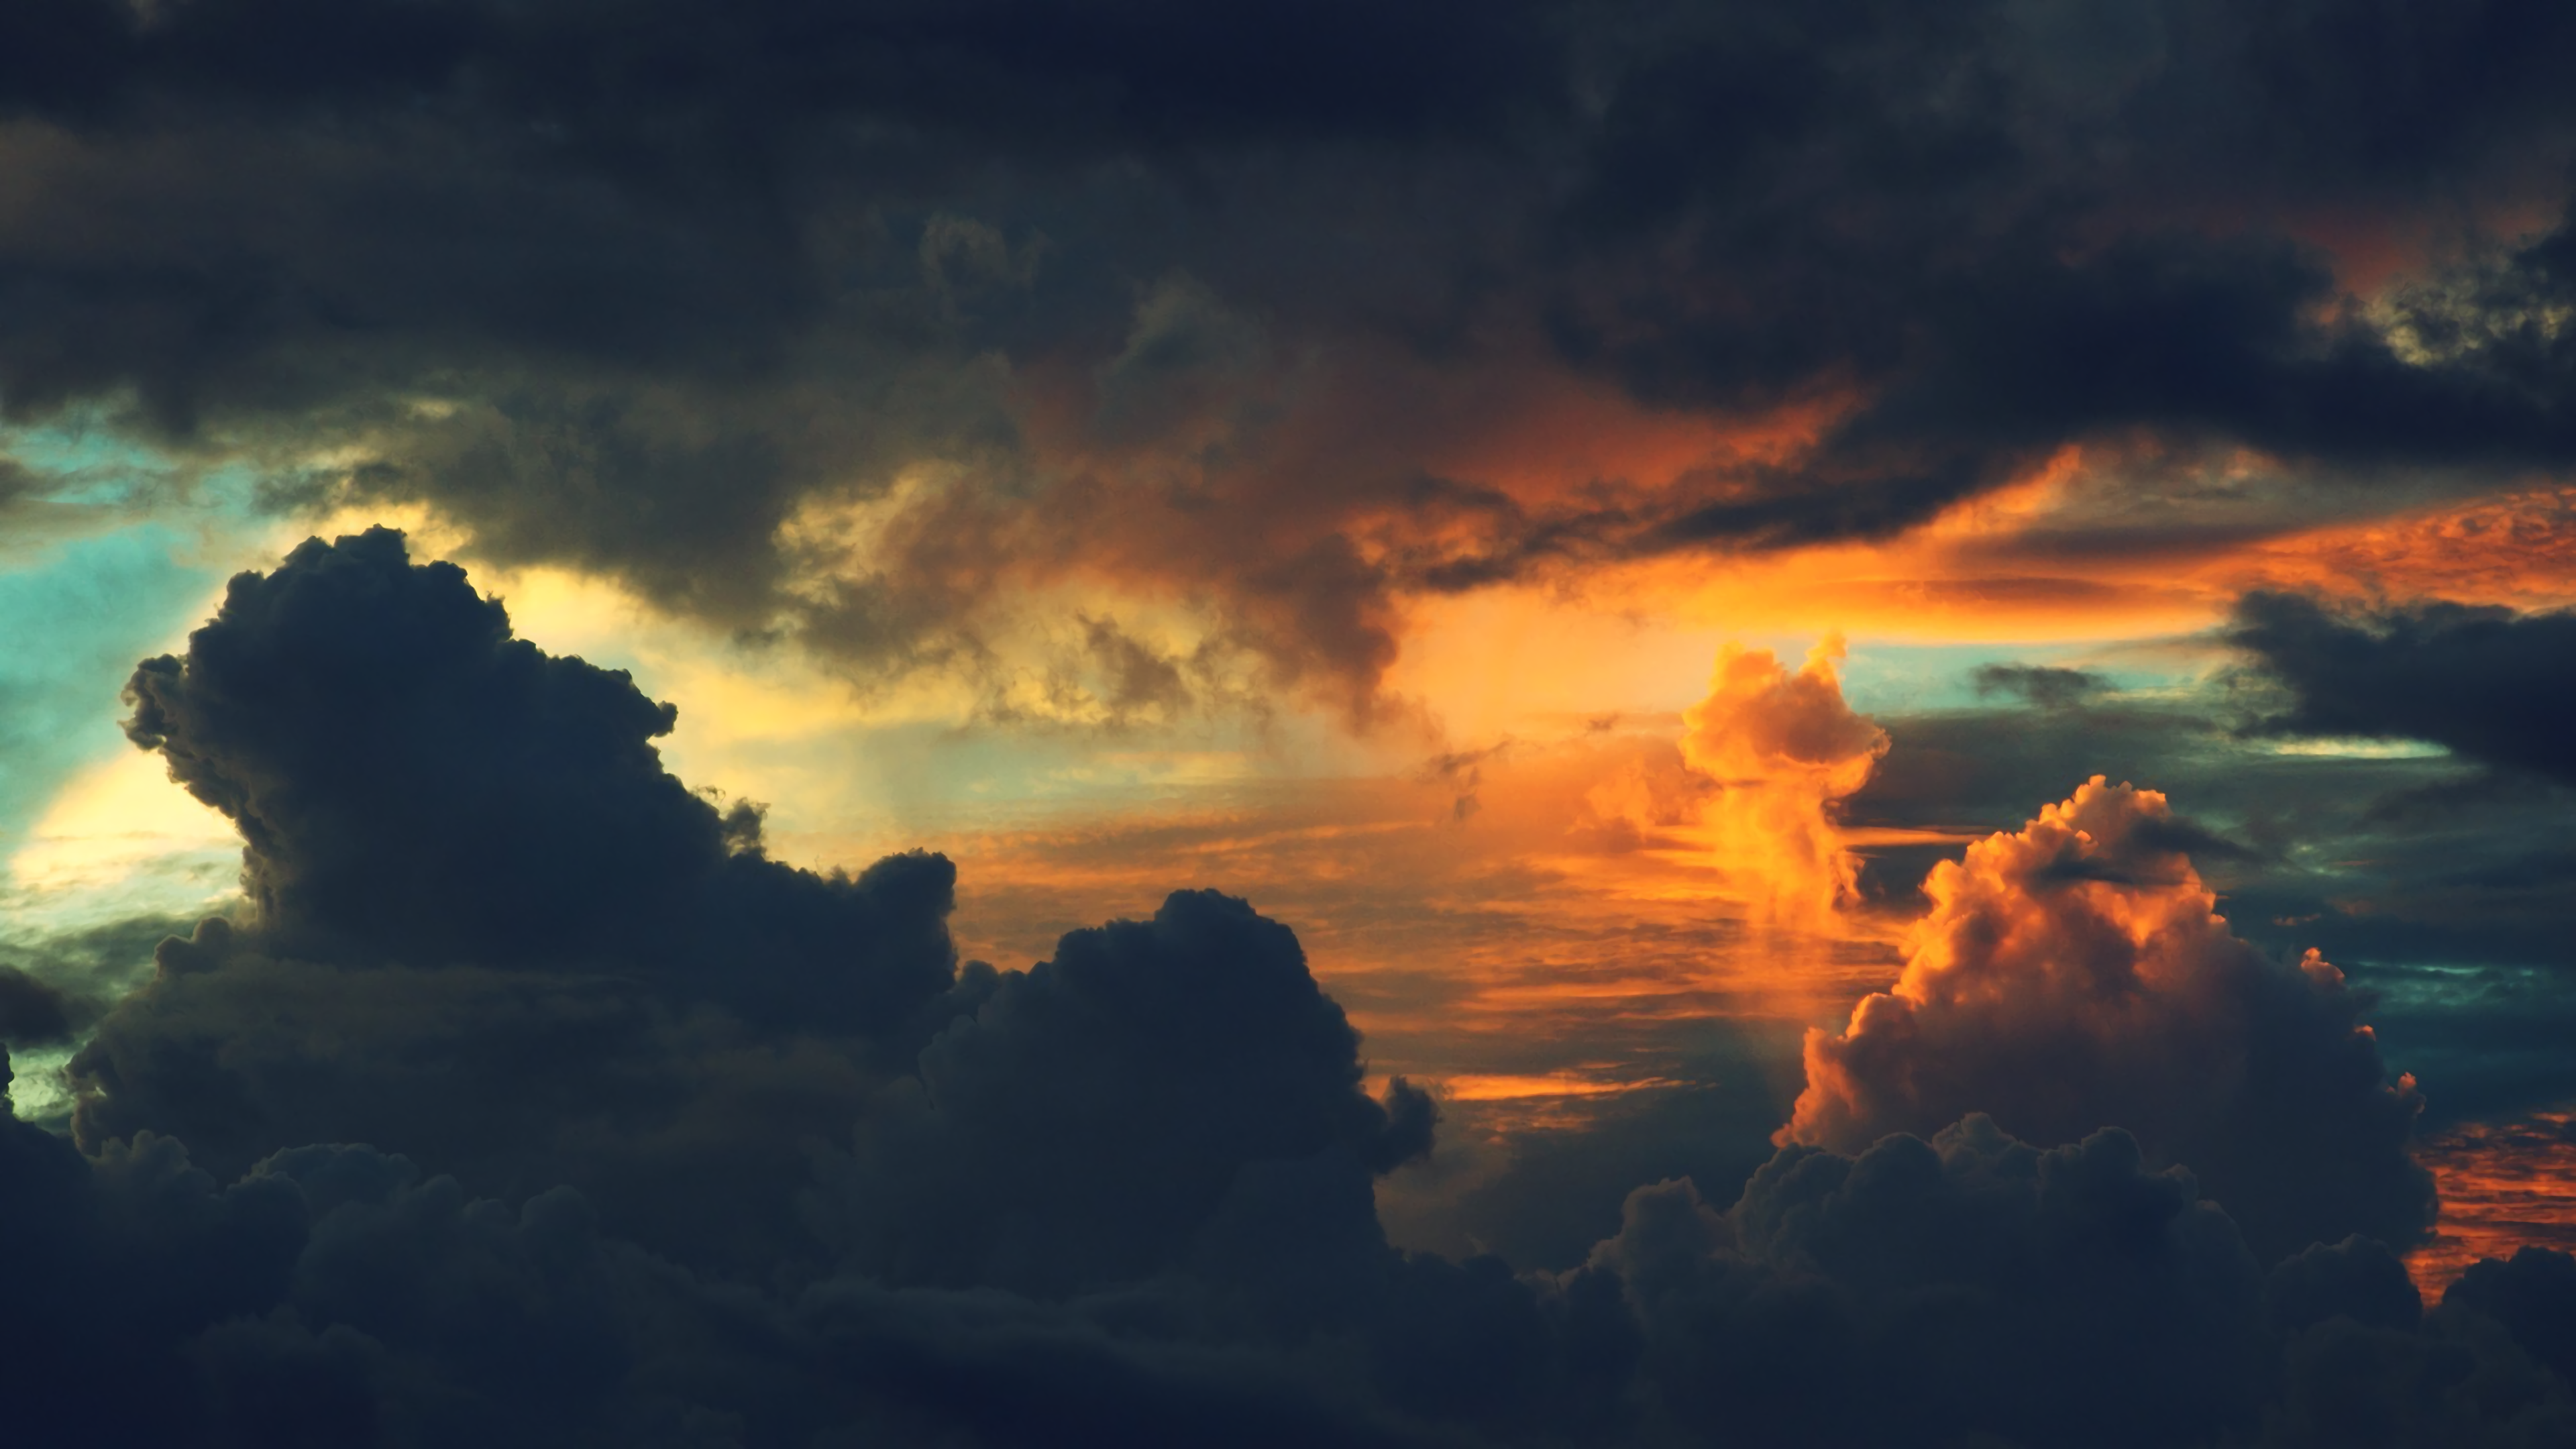 General 3840x2160 sky clouds sunset orange sky atmosphere skyscape nature